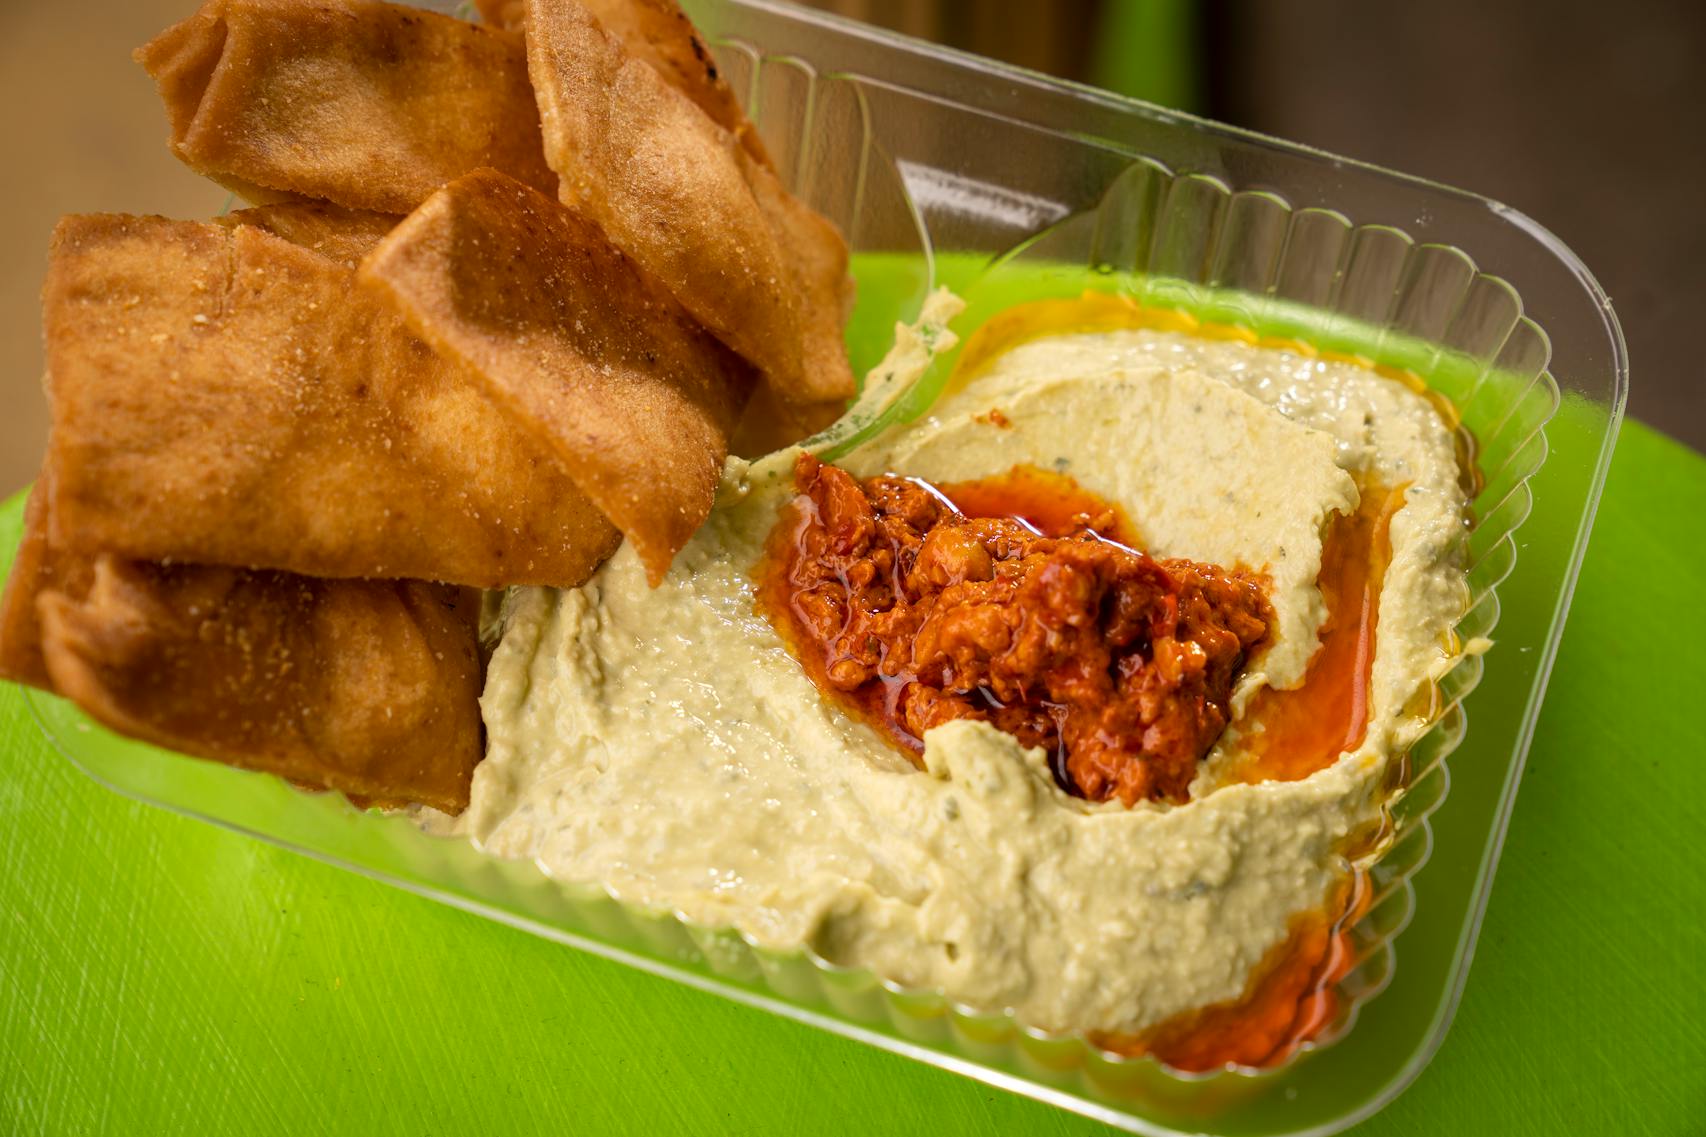 Basil Hummus from Holy Land. The new foods of the 2023 Minnesota State Fair photographed on the first day of the fair in Falcon Heights, Minn. on Tuesday, Aug. 8, 2023. ] LEILA NAVIDI • leila.navidi@startribune.com